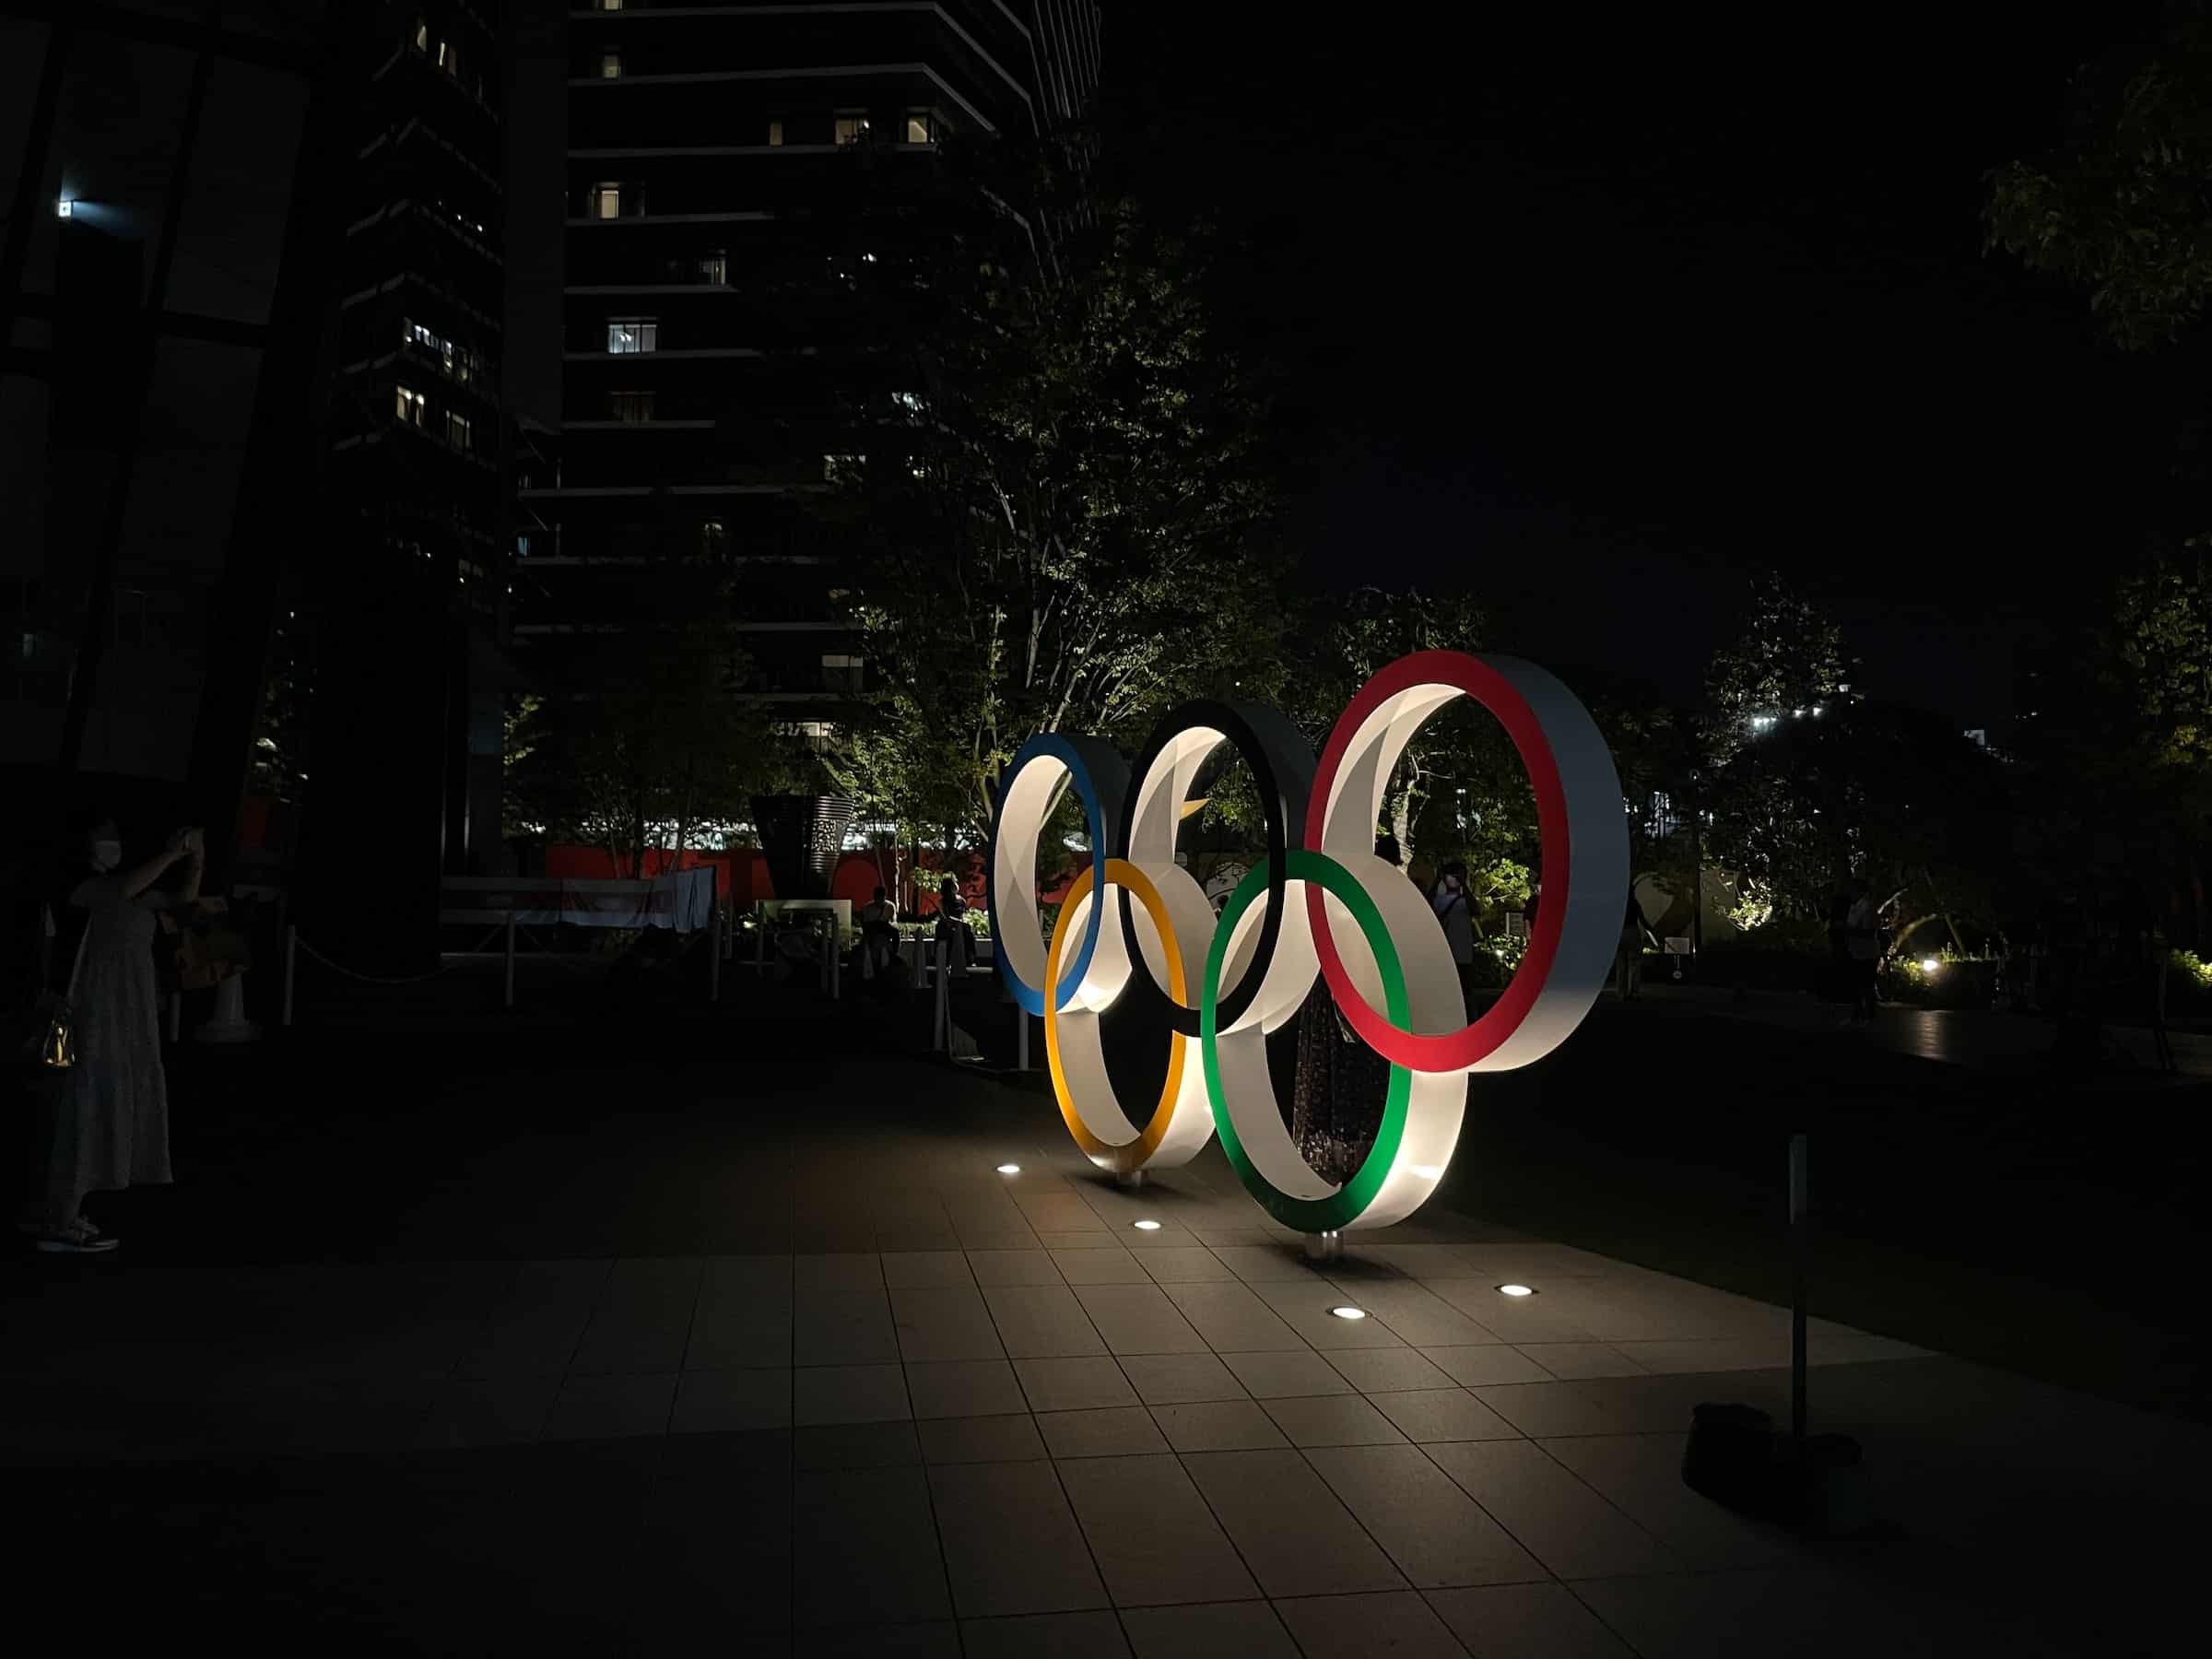 2012 Olympics: The First Social Games